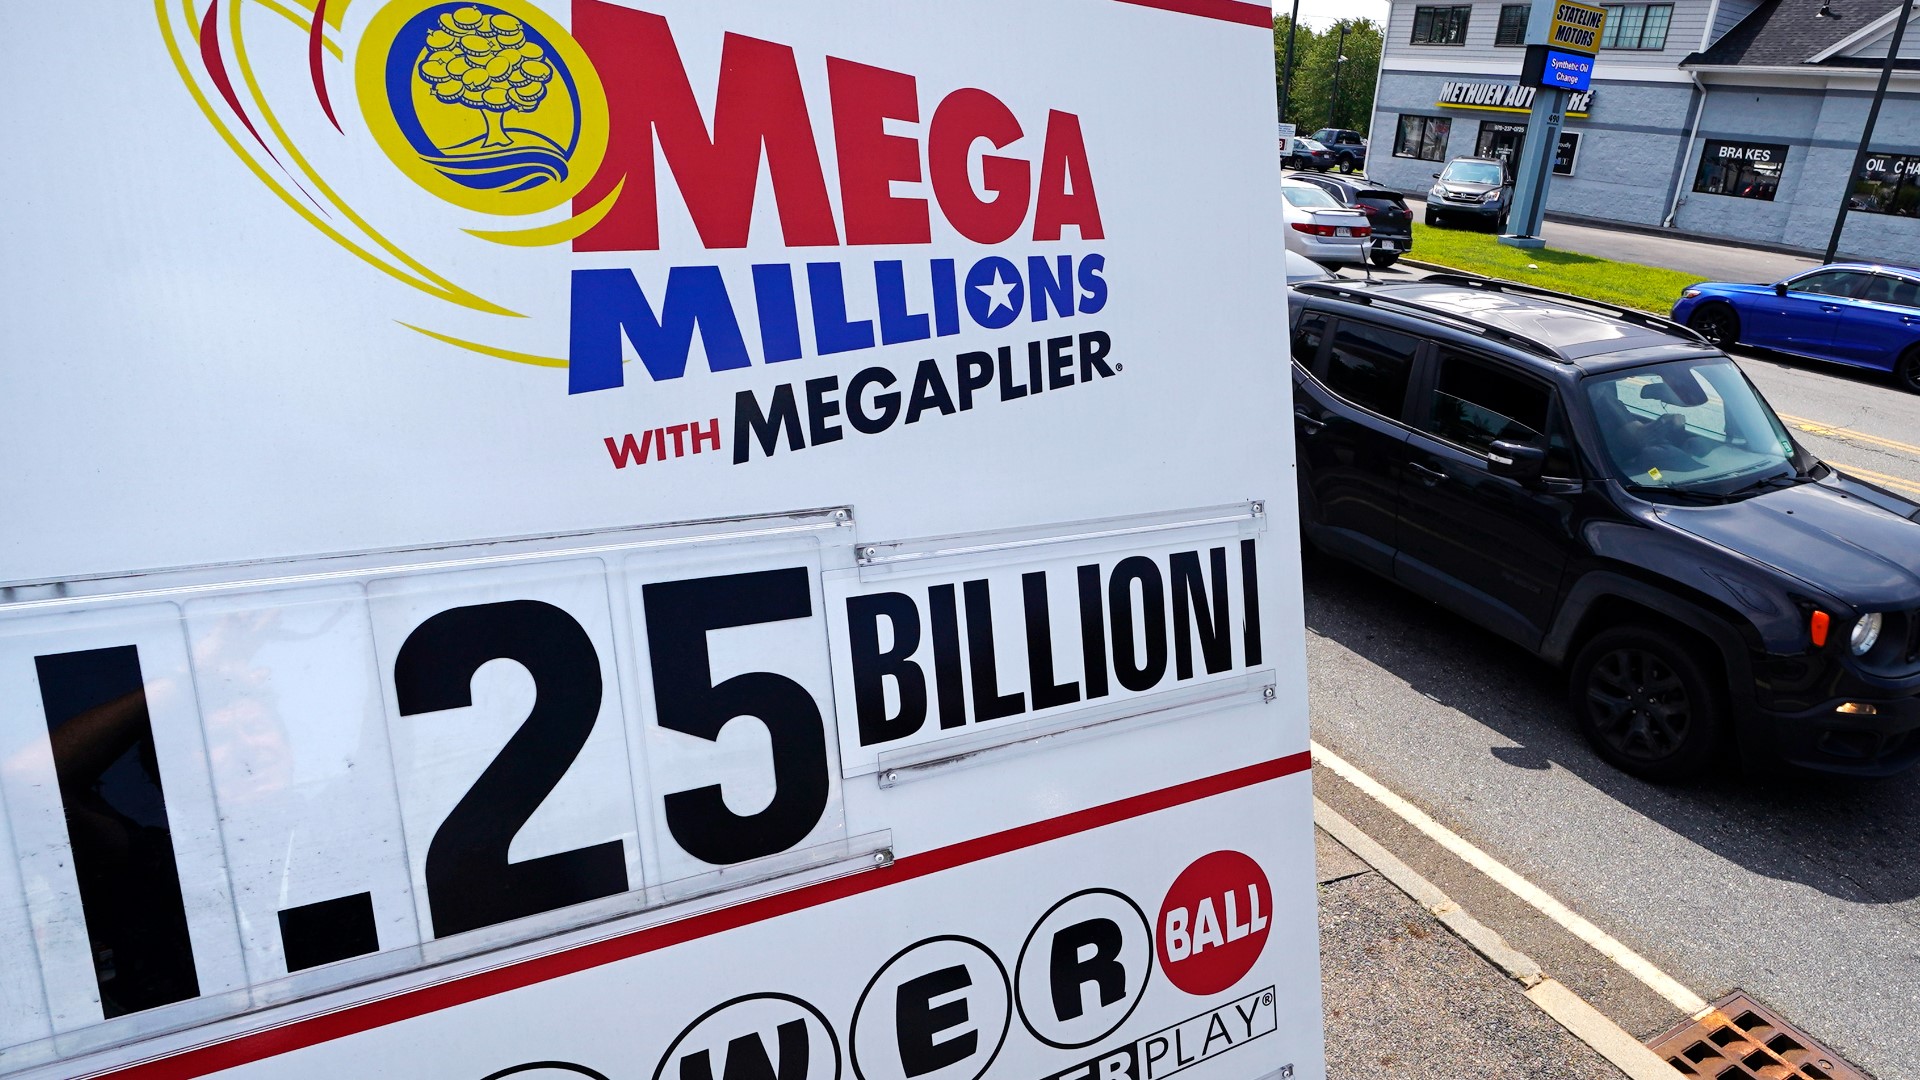 The odds of winning the Mega Millions jackpot are listed at one in 302,575,350.